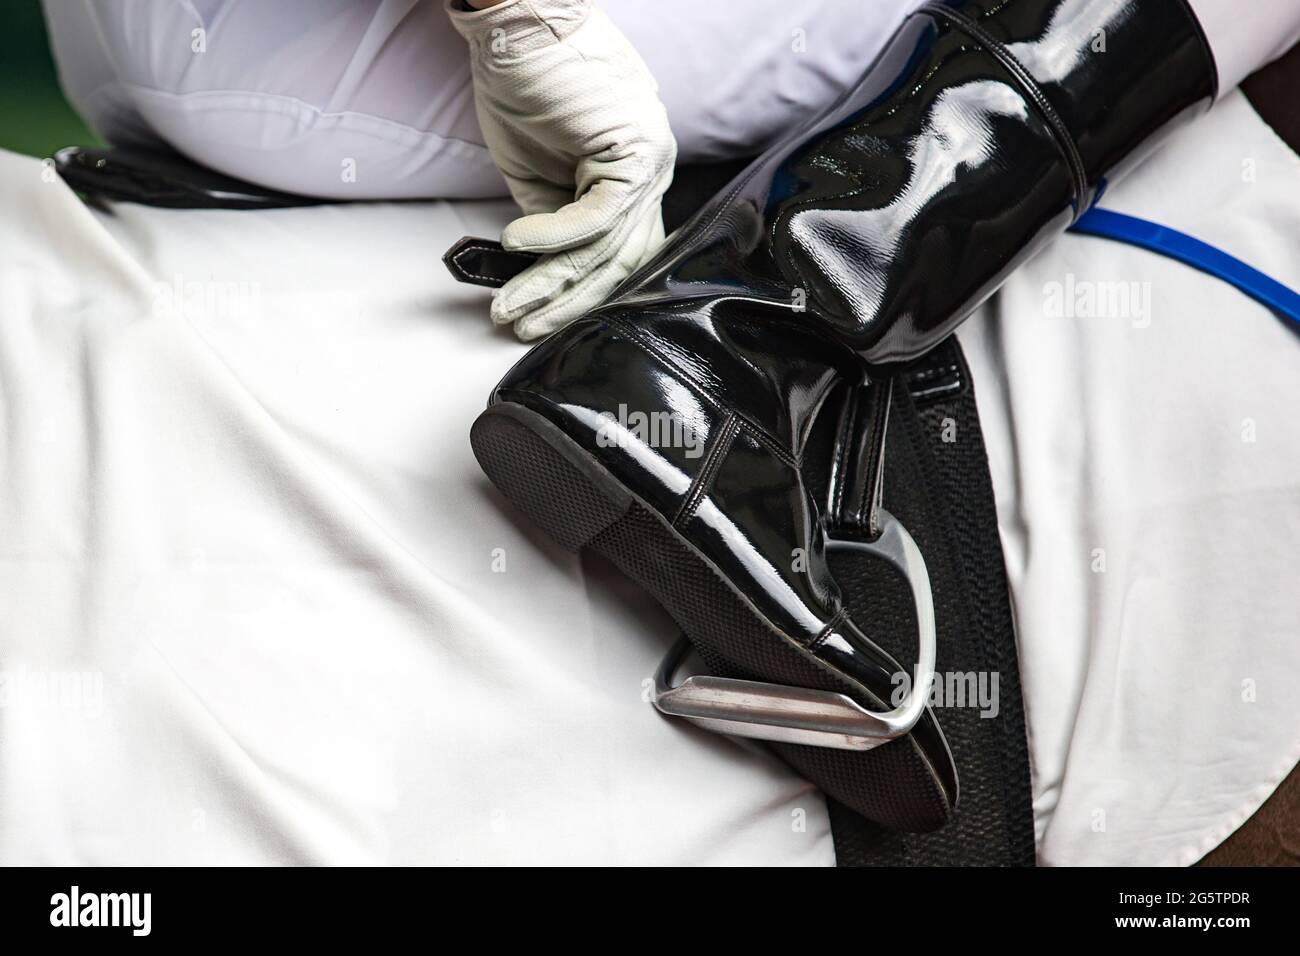 Horse racing themed photograph. Jockey adjusting the stirrup and the boot. Stock Photo